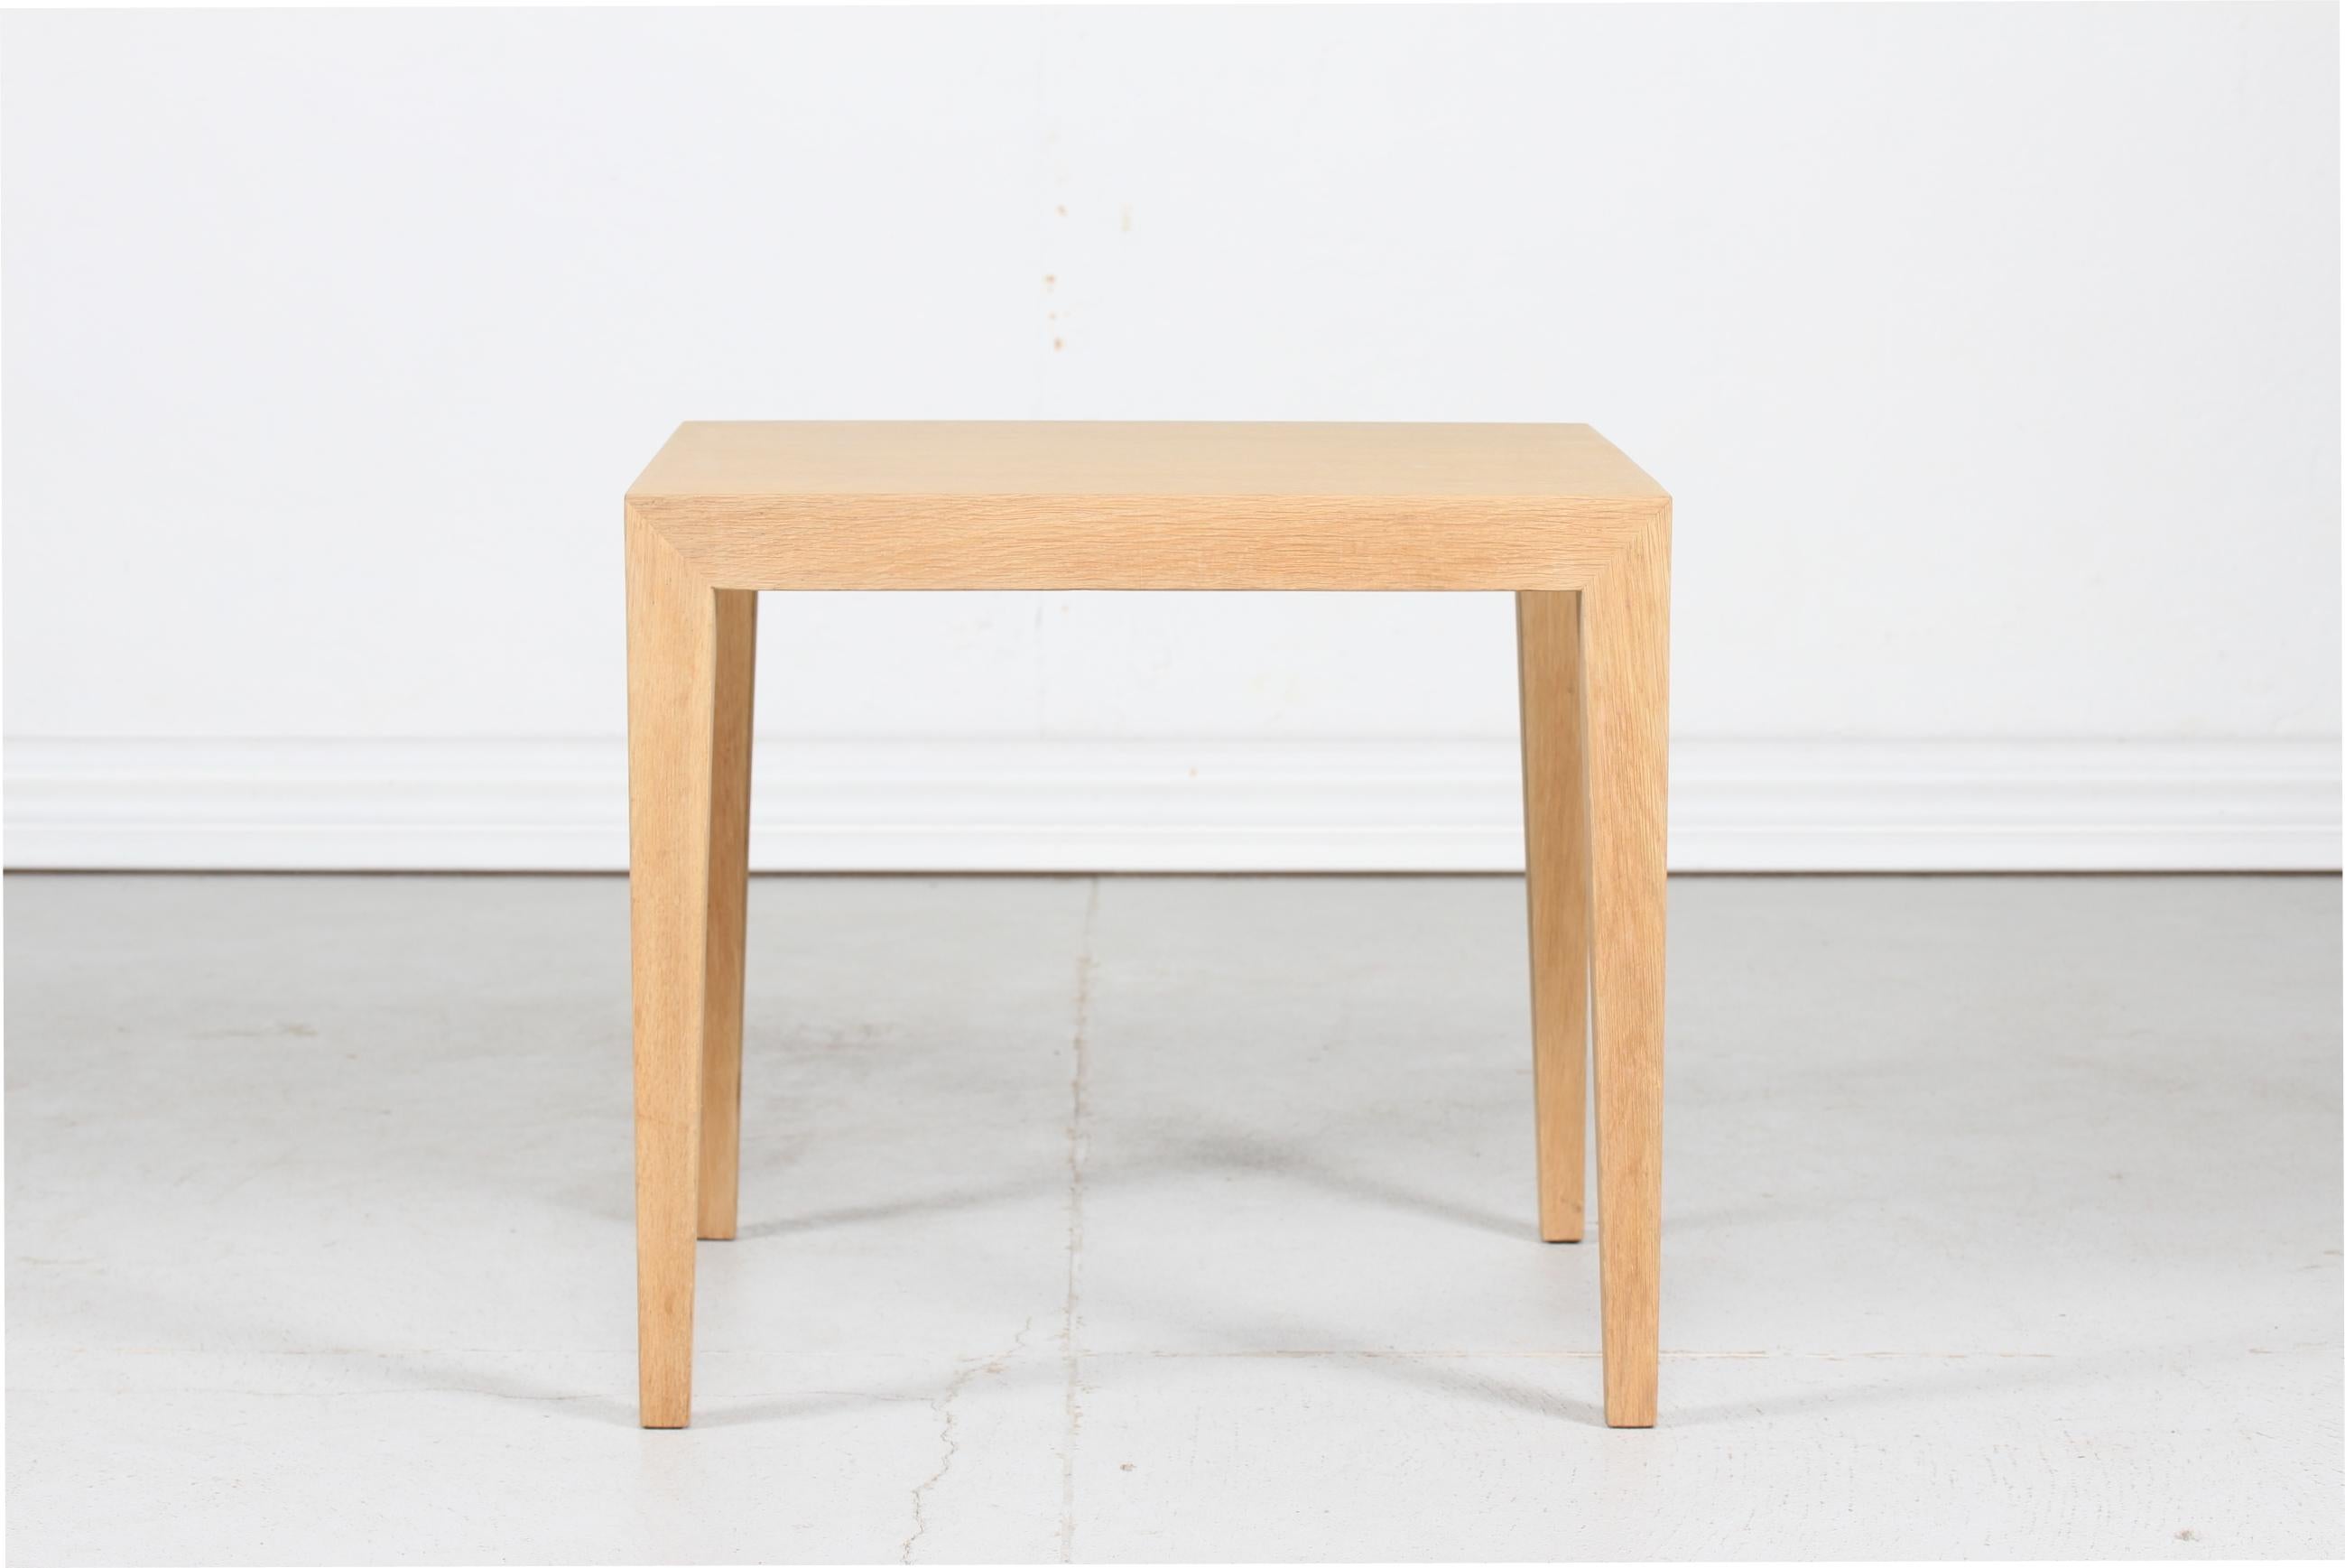 Danish modern square coffee table with pointed legs, designed by Severin Hansen Jr. and manufactured by Haslev Furniture

The table is made of oak veneer with soap treatment and remain in very nice condition.
  